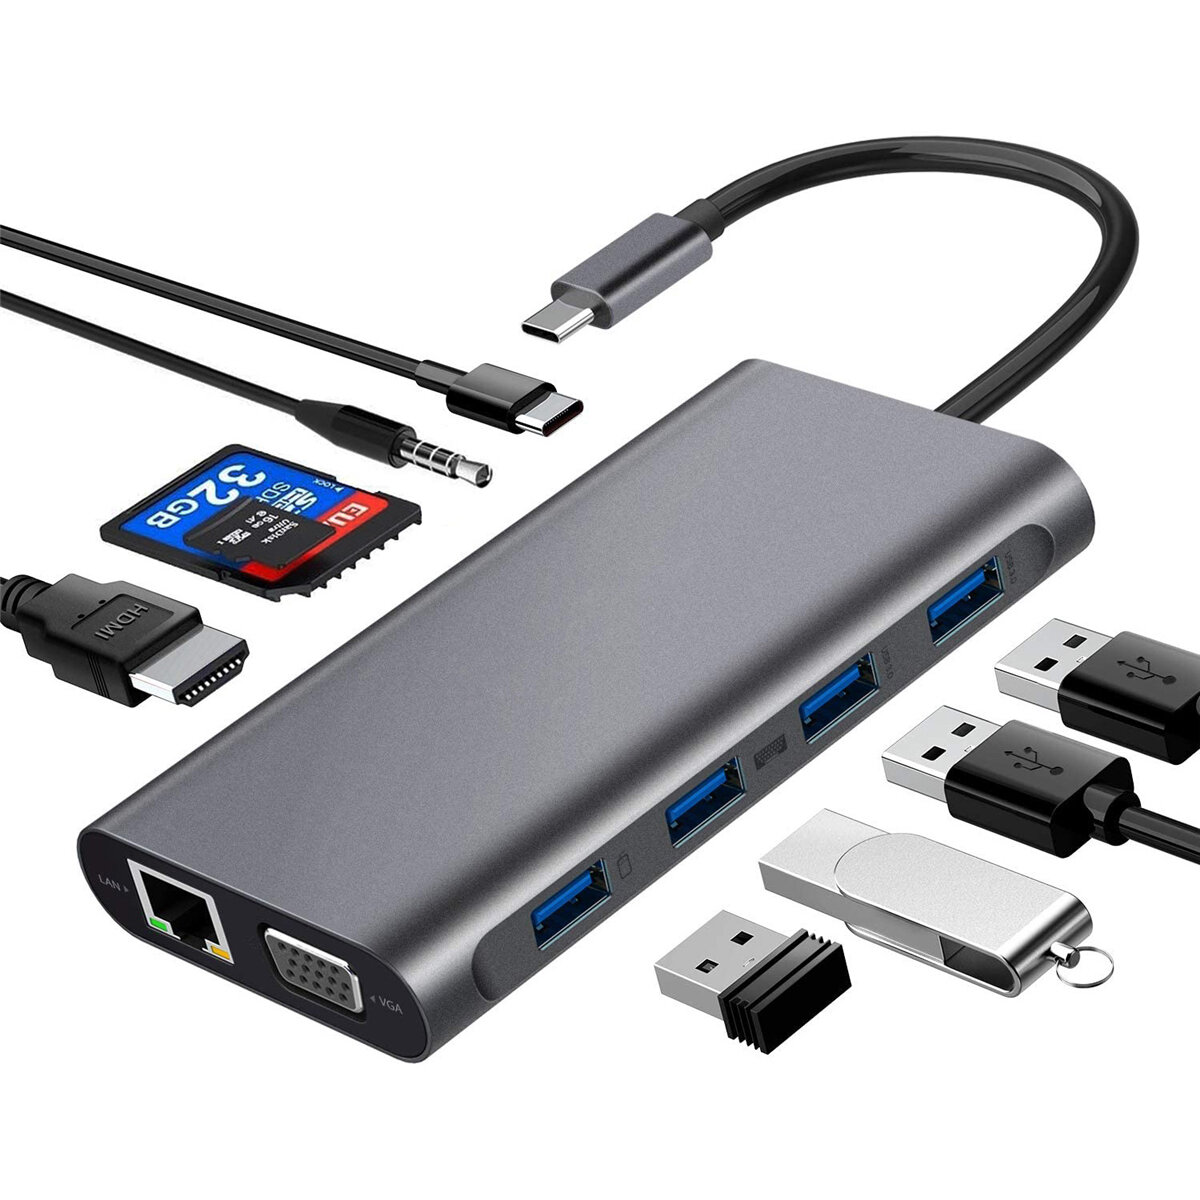 

Bakeey Type-c 11 In 1 Docking Station With USB 3.0*4/RJ45/VGA/HDMI/PD/TF/SD/3.5 Audio Port Fast Charge For MacBook Lapto